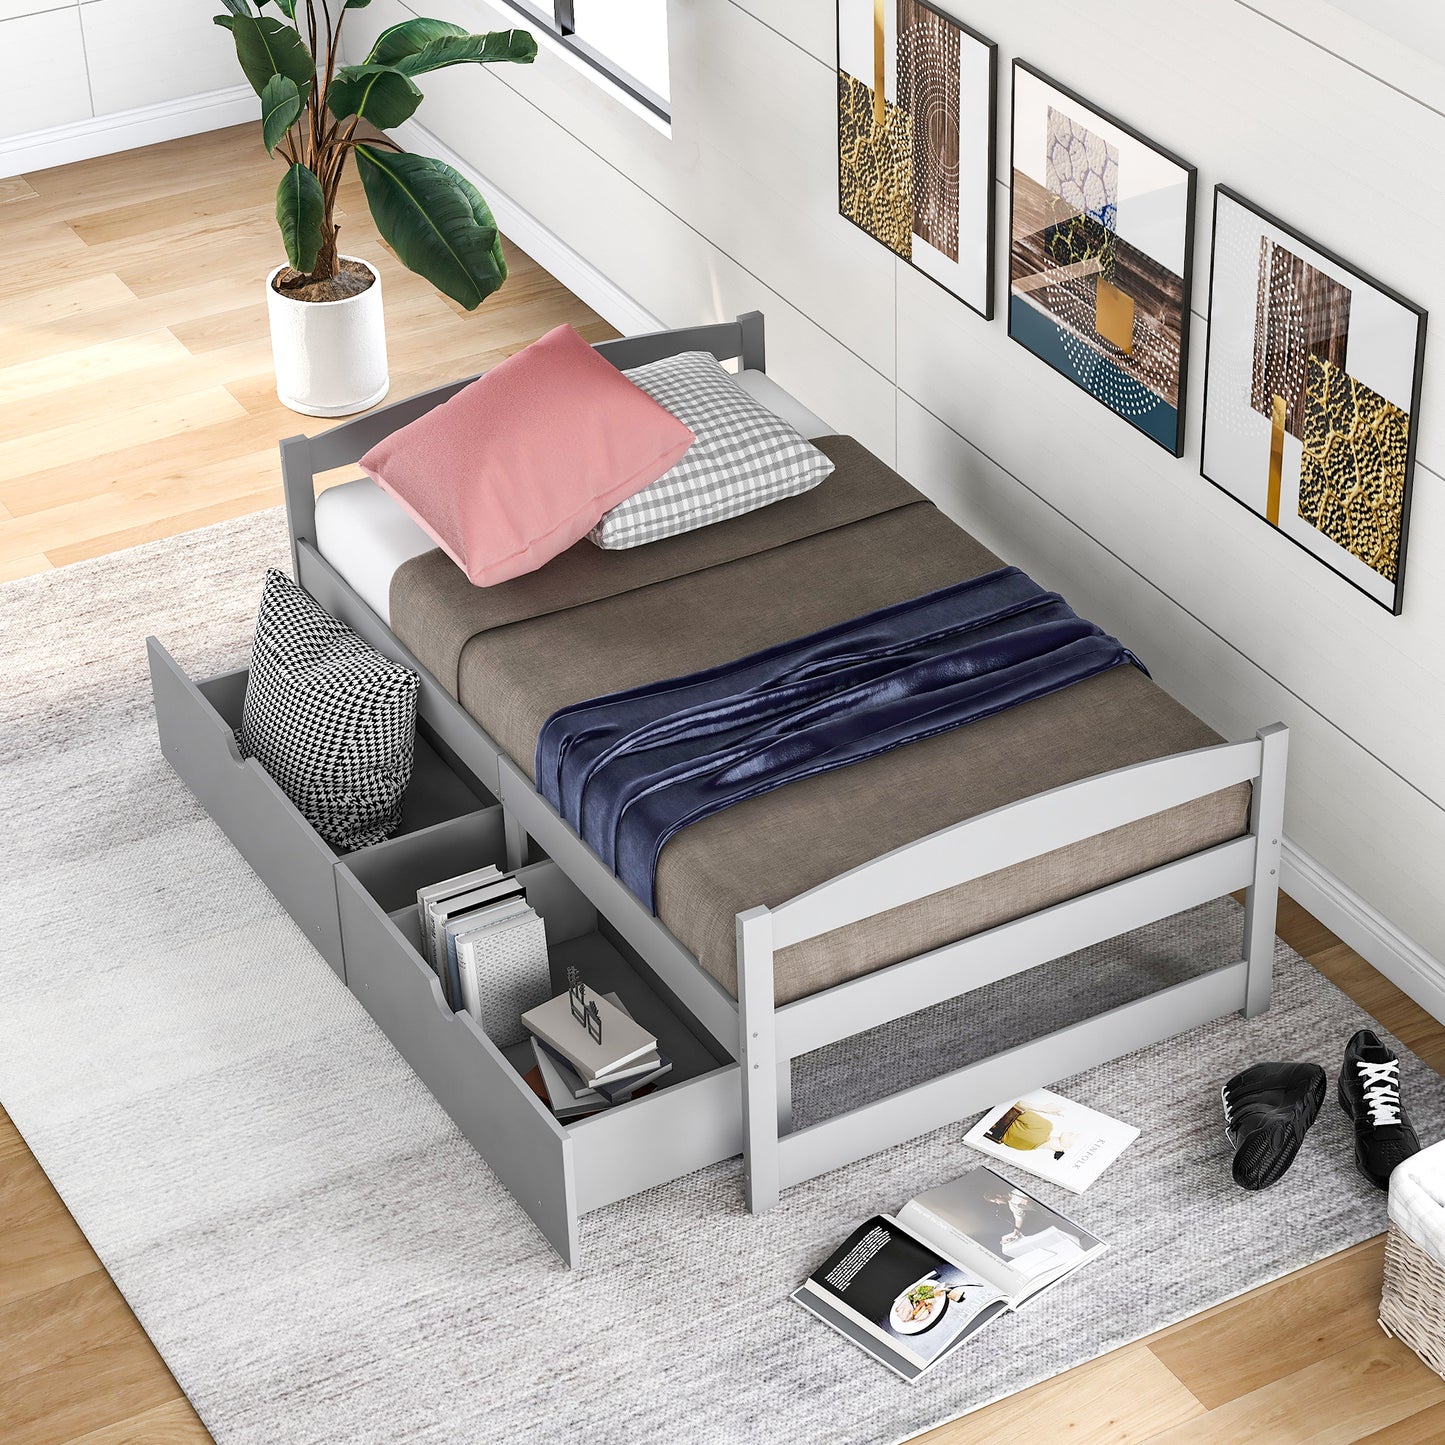 Twin size platform bed, with two drawers, gray （New）